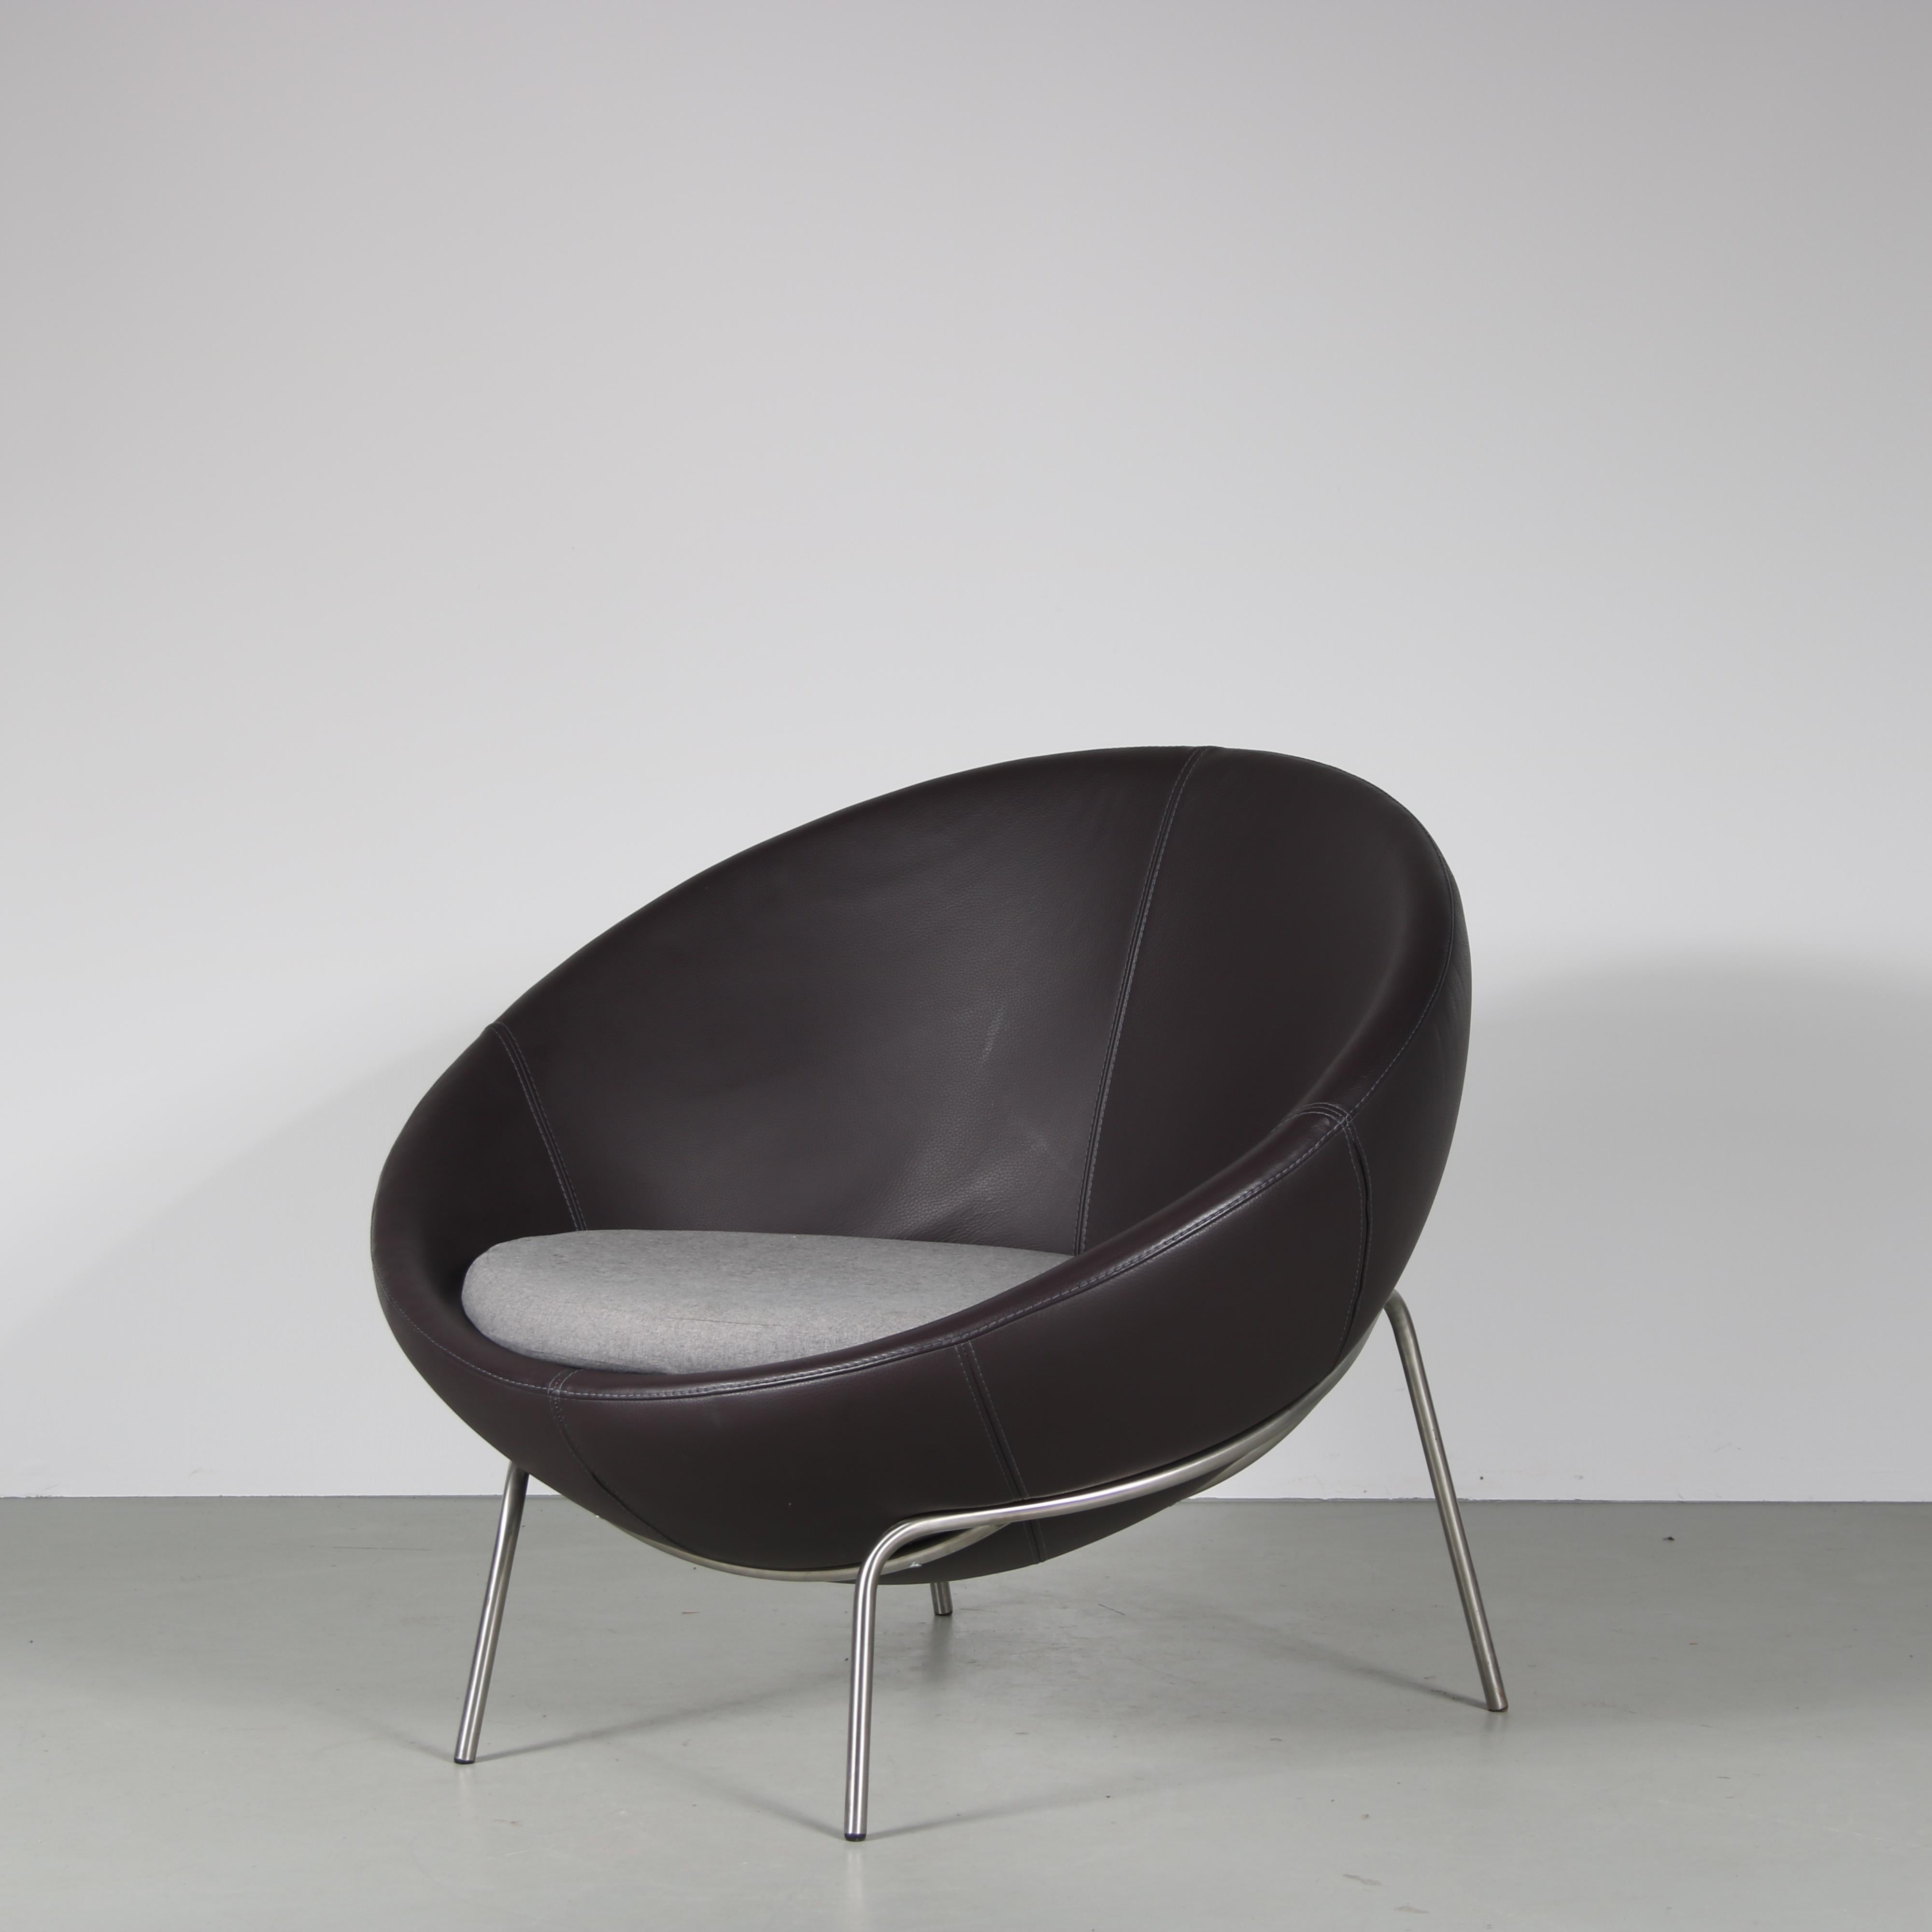 A lovely lounge chair, manufactured by Bert Plantagie in the Netherlands around 2000.

This eye-catching, modern piece has a large round shell upholstered in high quality dark aubergine coloured leather. It holds a grey wool cushion which nicely